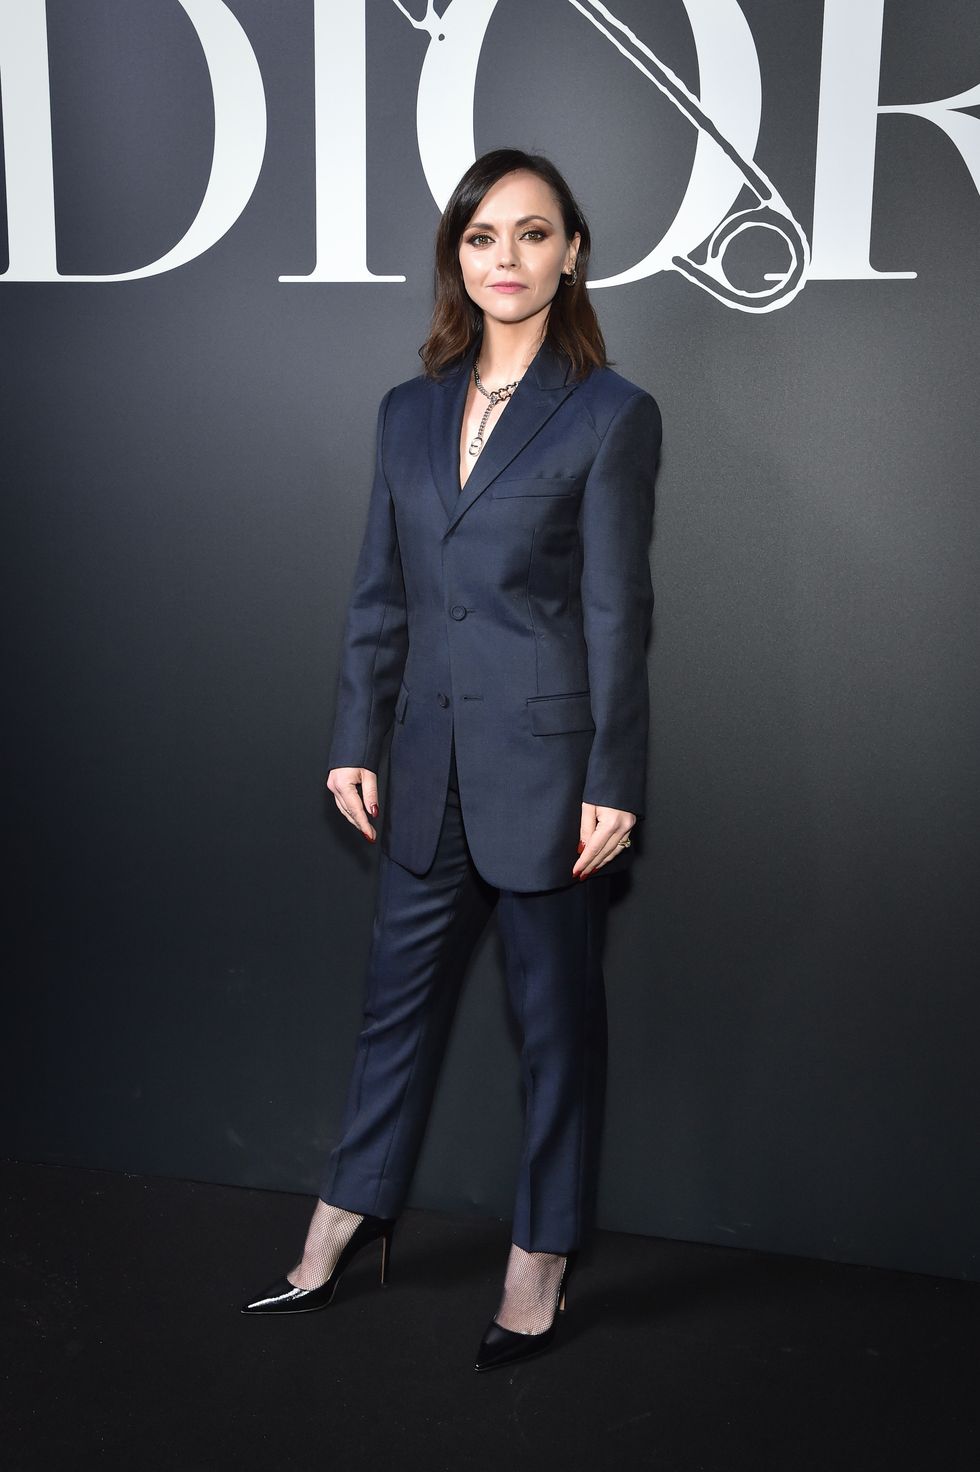 paris, france   january 17 christina ricci attends the dior homme menswear fallwinter 2020 2021 show as part of paris fashion week on january 17, 2020 in paris, france photo by stephane cardinale   corbiscorbis via getty images